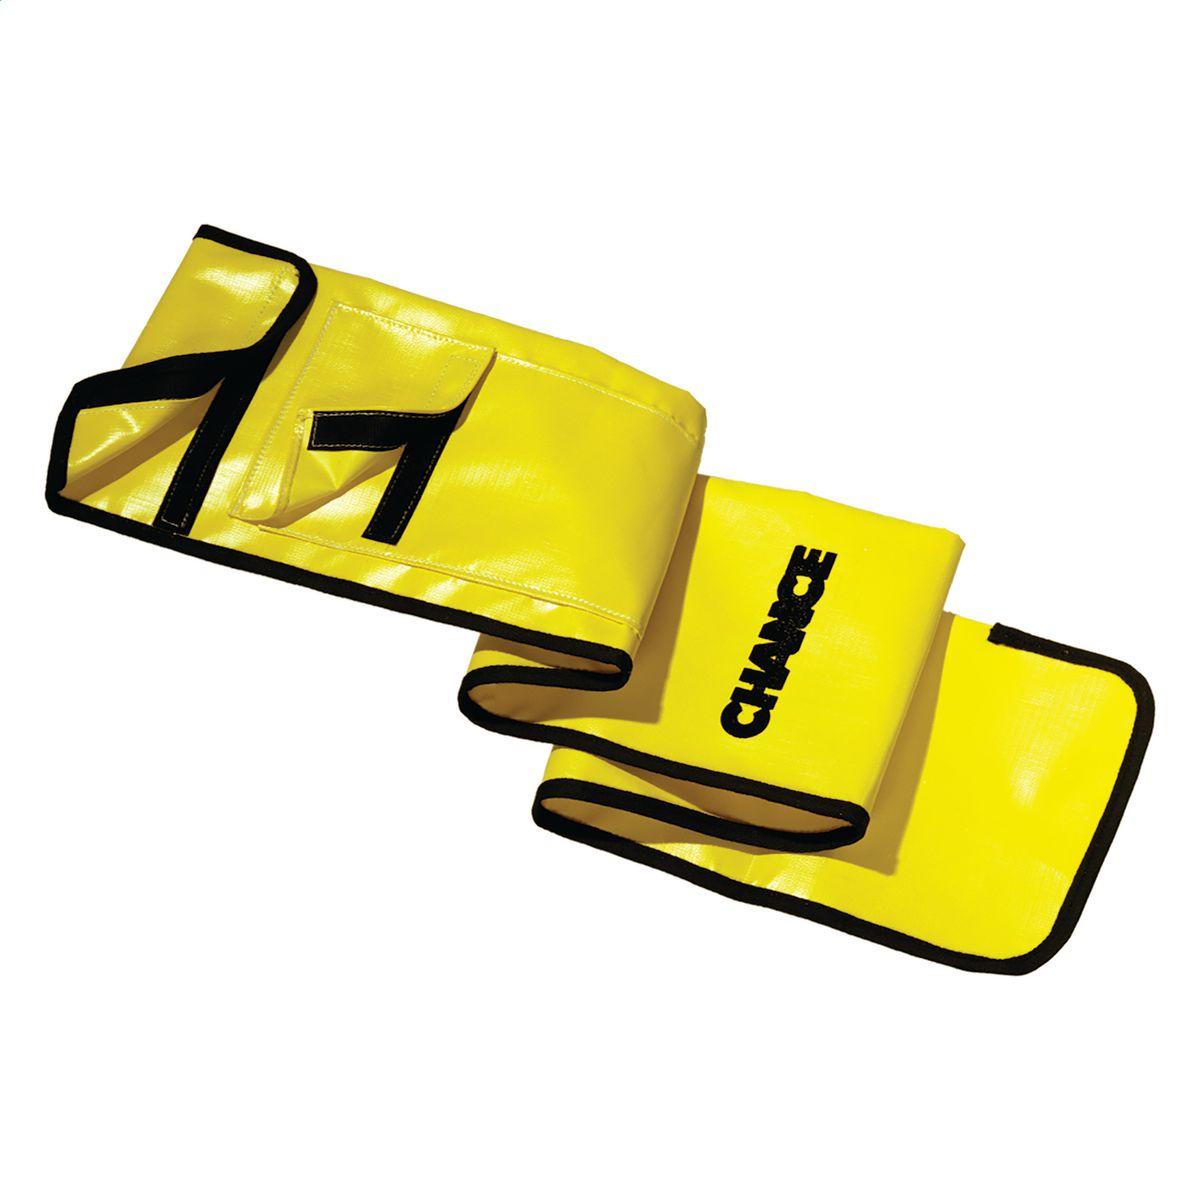 Hubbell P6435 TOOL BAG, 6'8" L X 9" W, Chance waterproof storage bags help guard against contaminants and abrasion to help maintain the insulating properties of hotline tools. Yellow heavy-duty vinyl-impregnated fabric lasts for years of rugged service. Snaps, Velcro� 